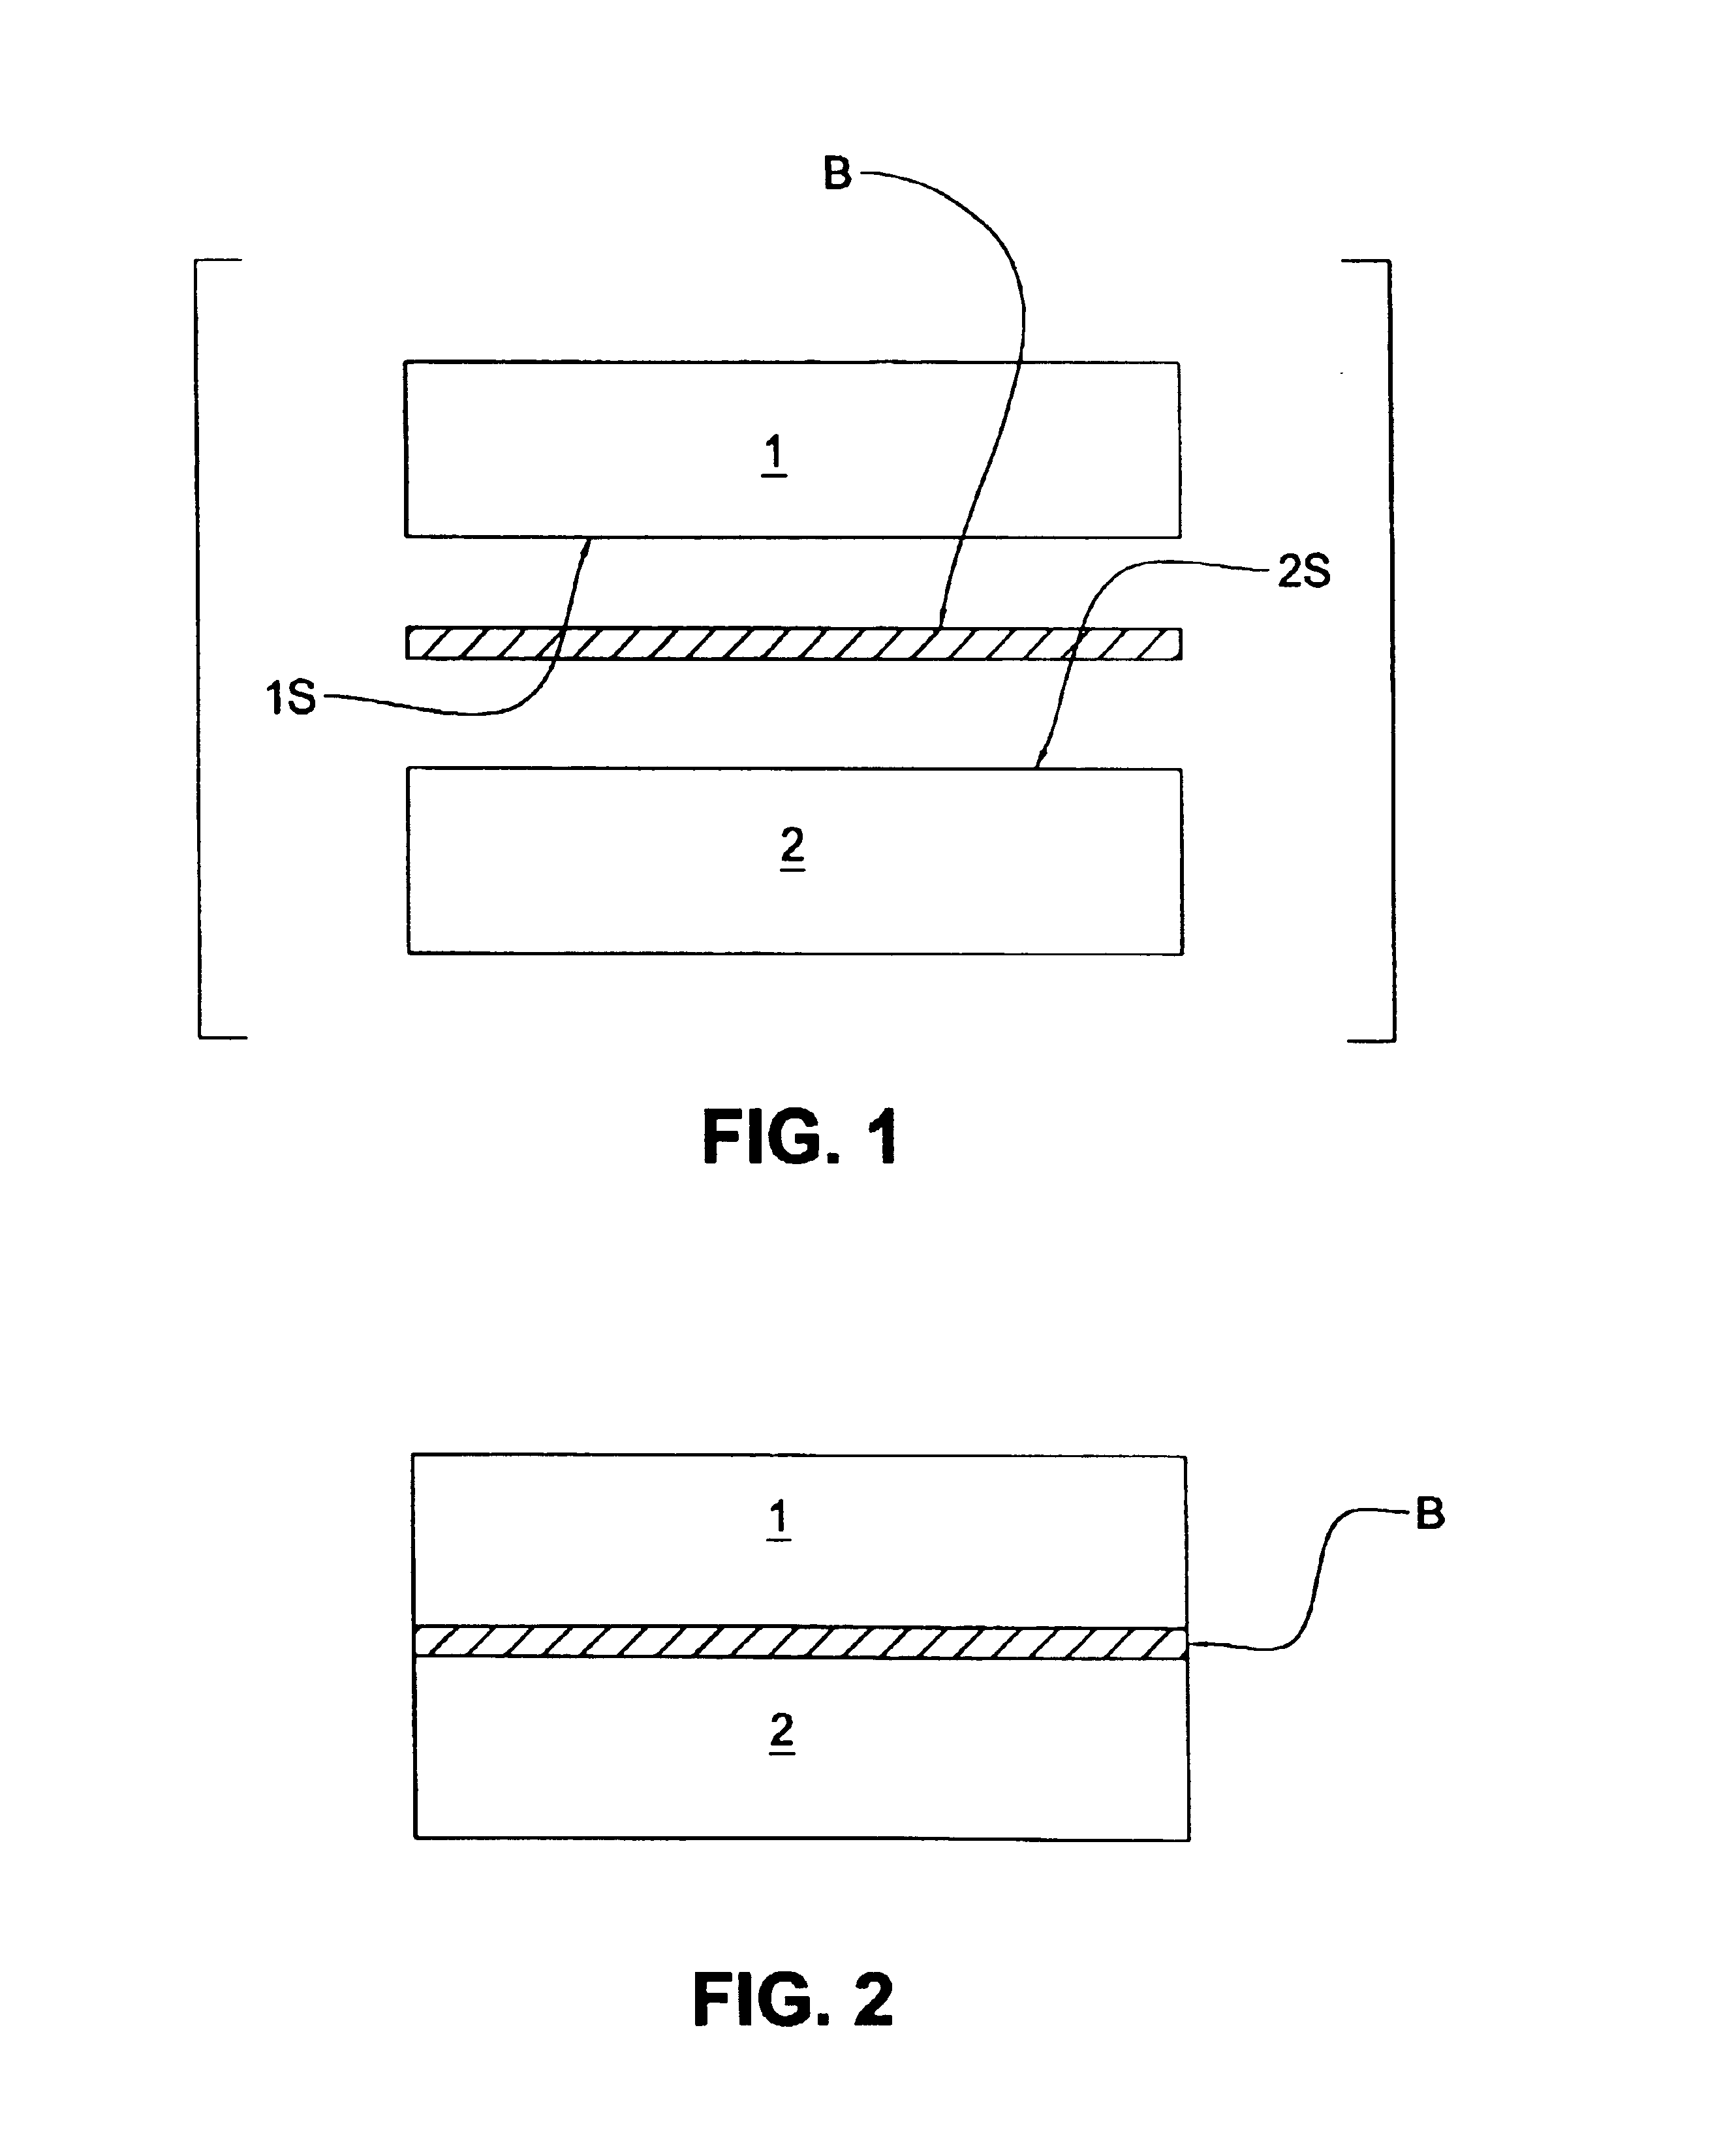 Method of joining ceramic or graphite to metal with an alloy having high nickel or cobalt content, alloys for joining the same, and products formed therewith